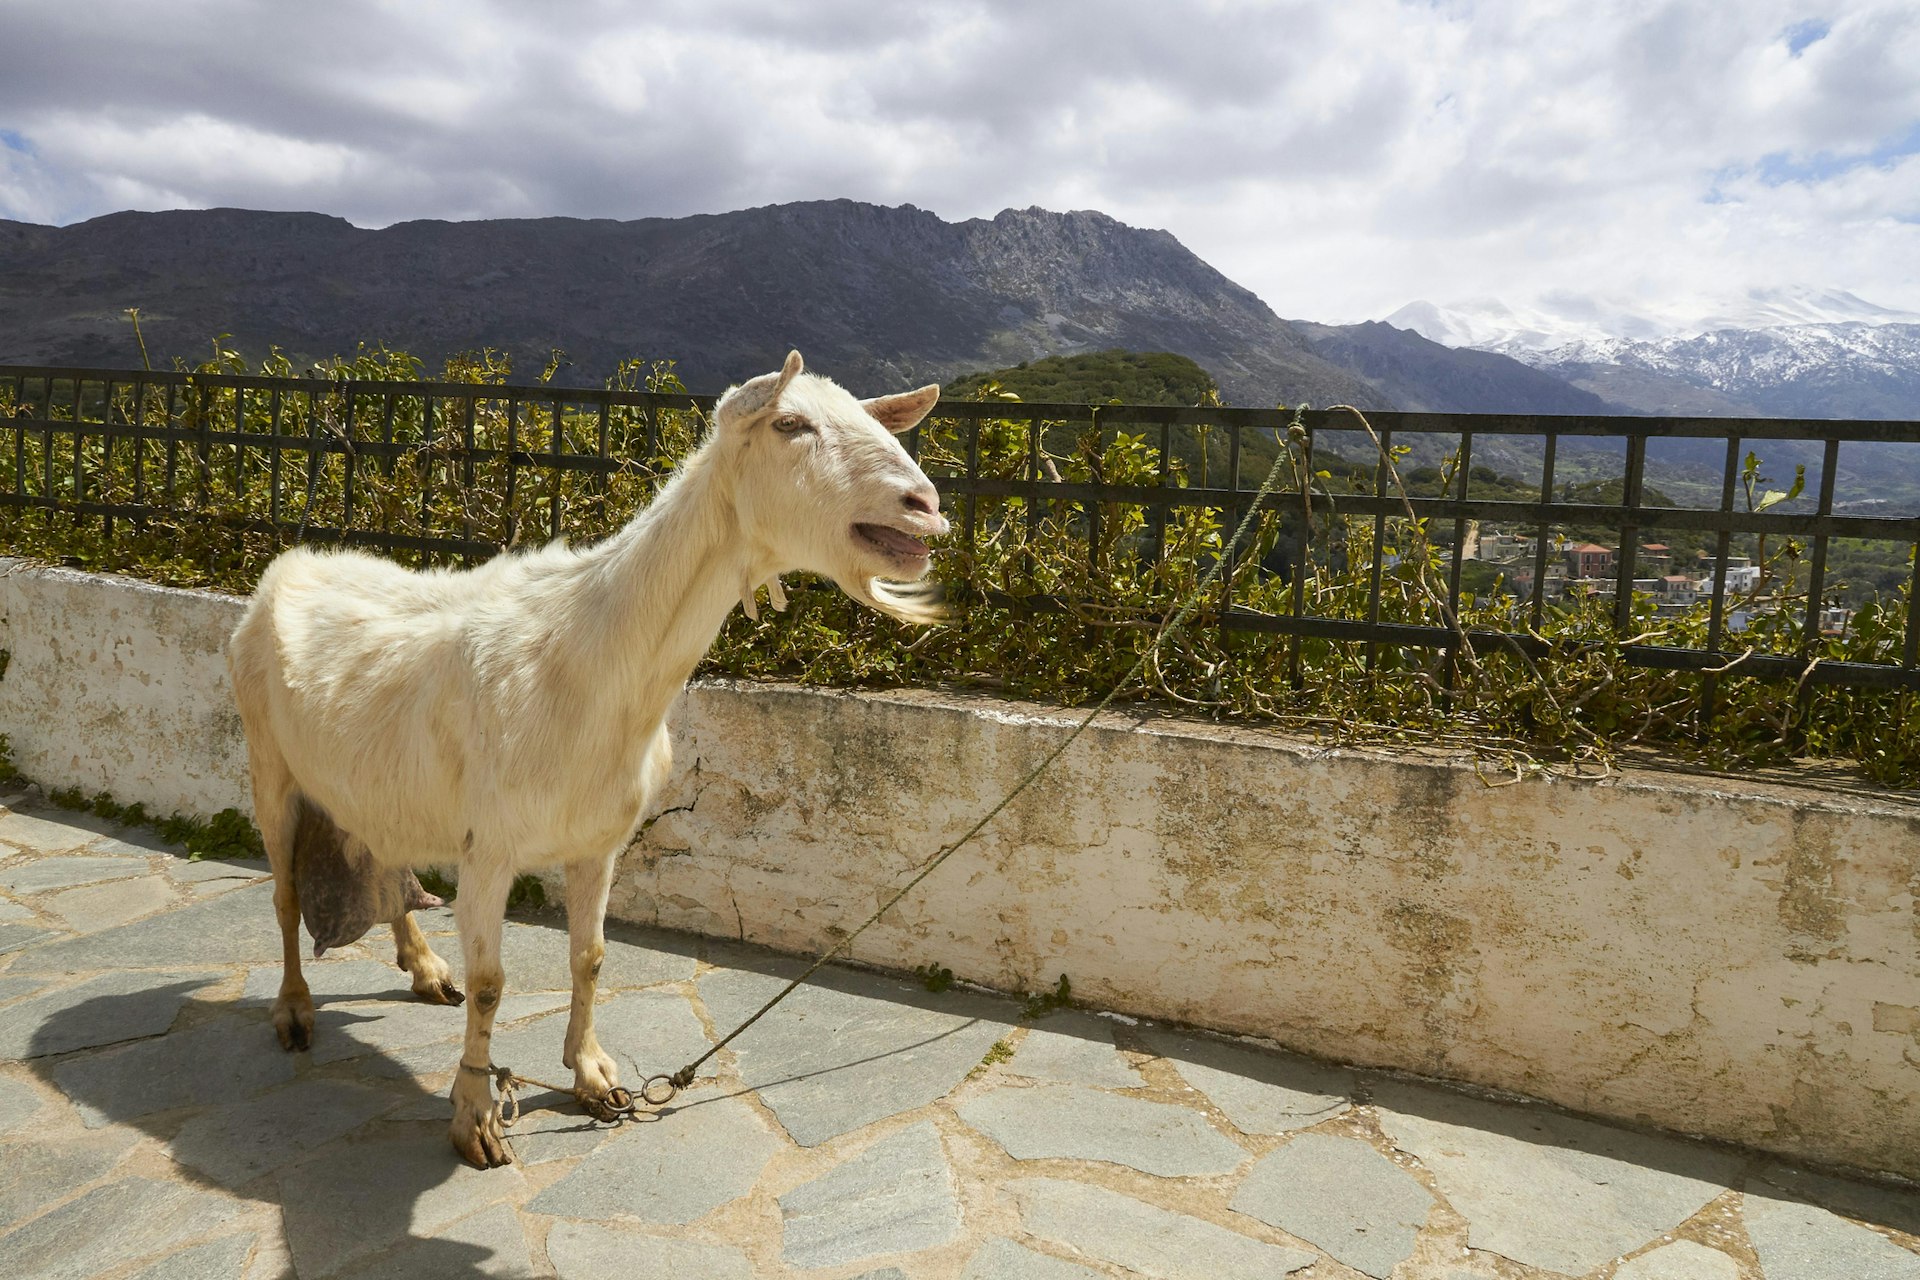 A goat bleats on a terrace against snow-capped mountains and a cloudy sky in spring, Amari, Psiloritis, Ida Massif, Thronos, Crete, Greece, Europe